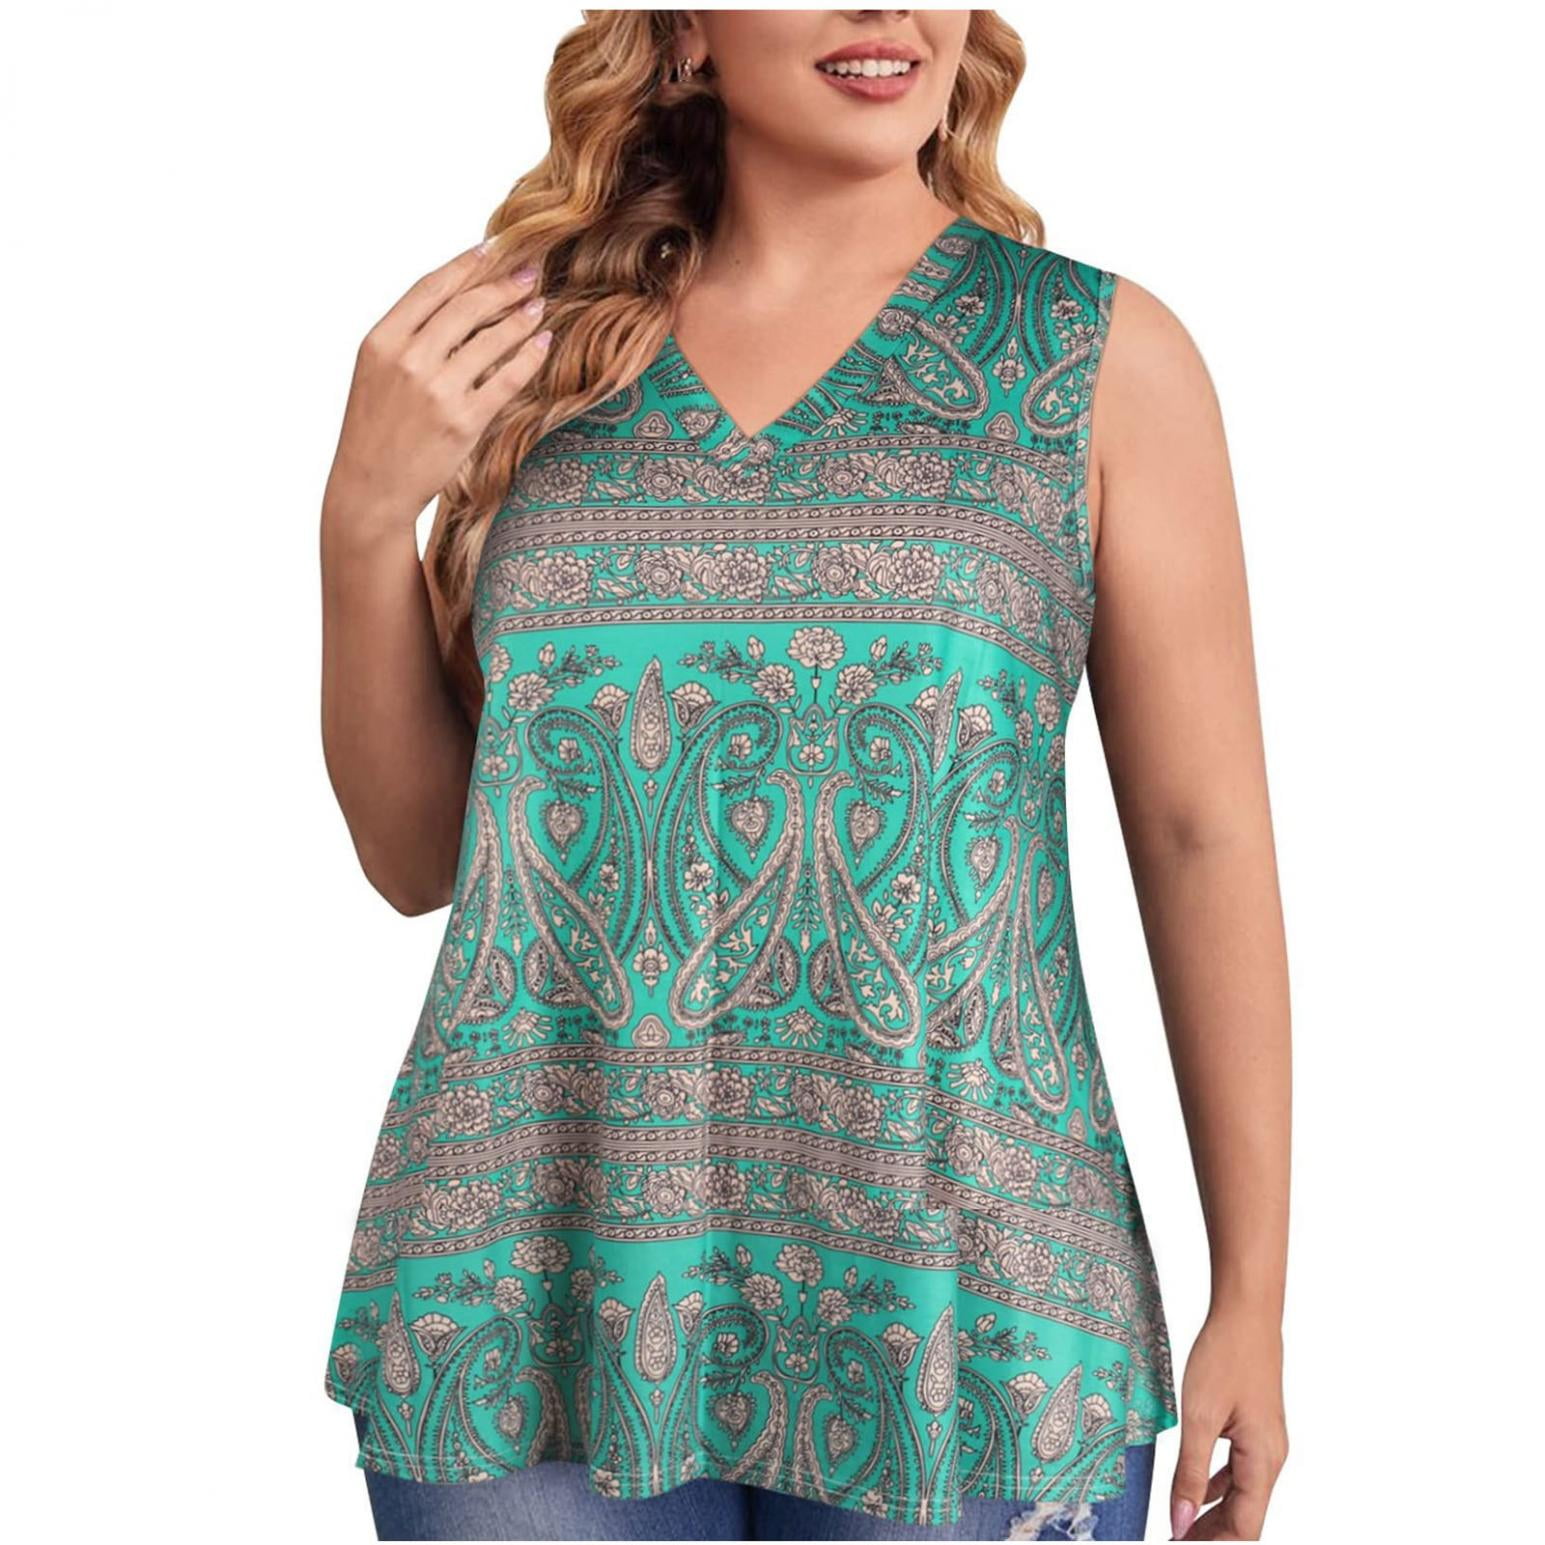 green Top women's tank top V-neck loose and fluid tunic